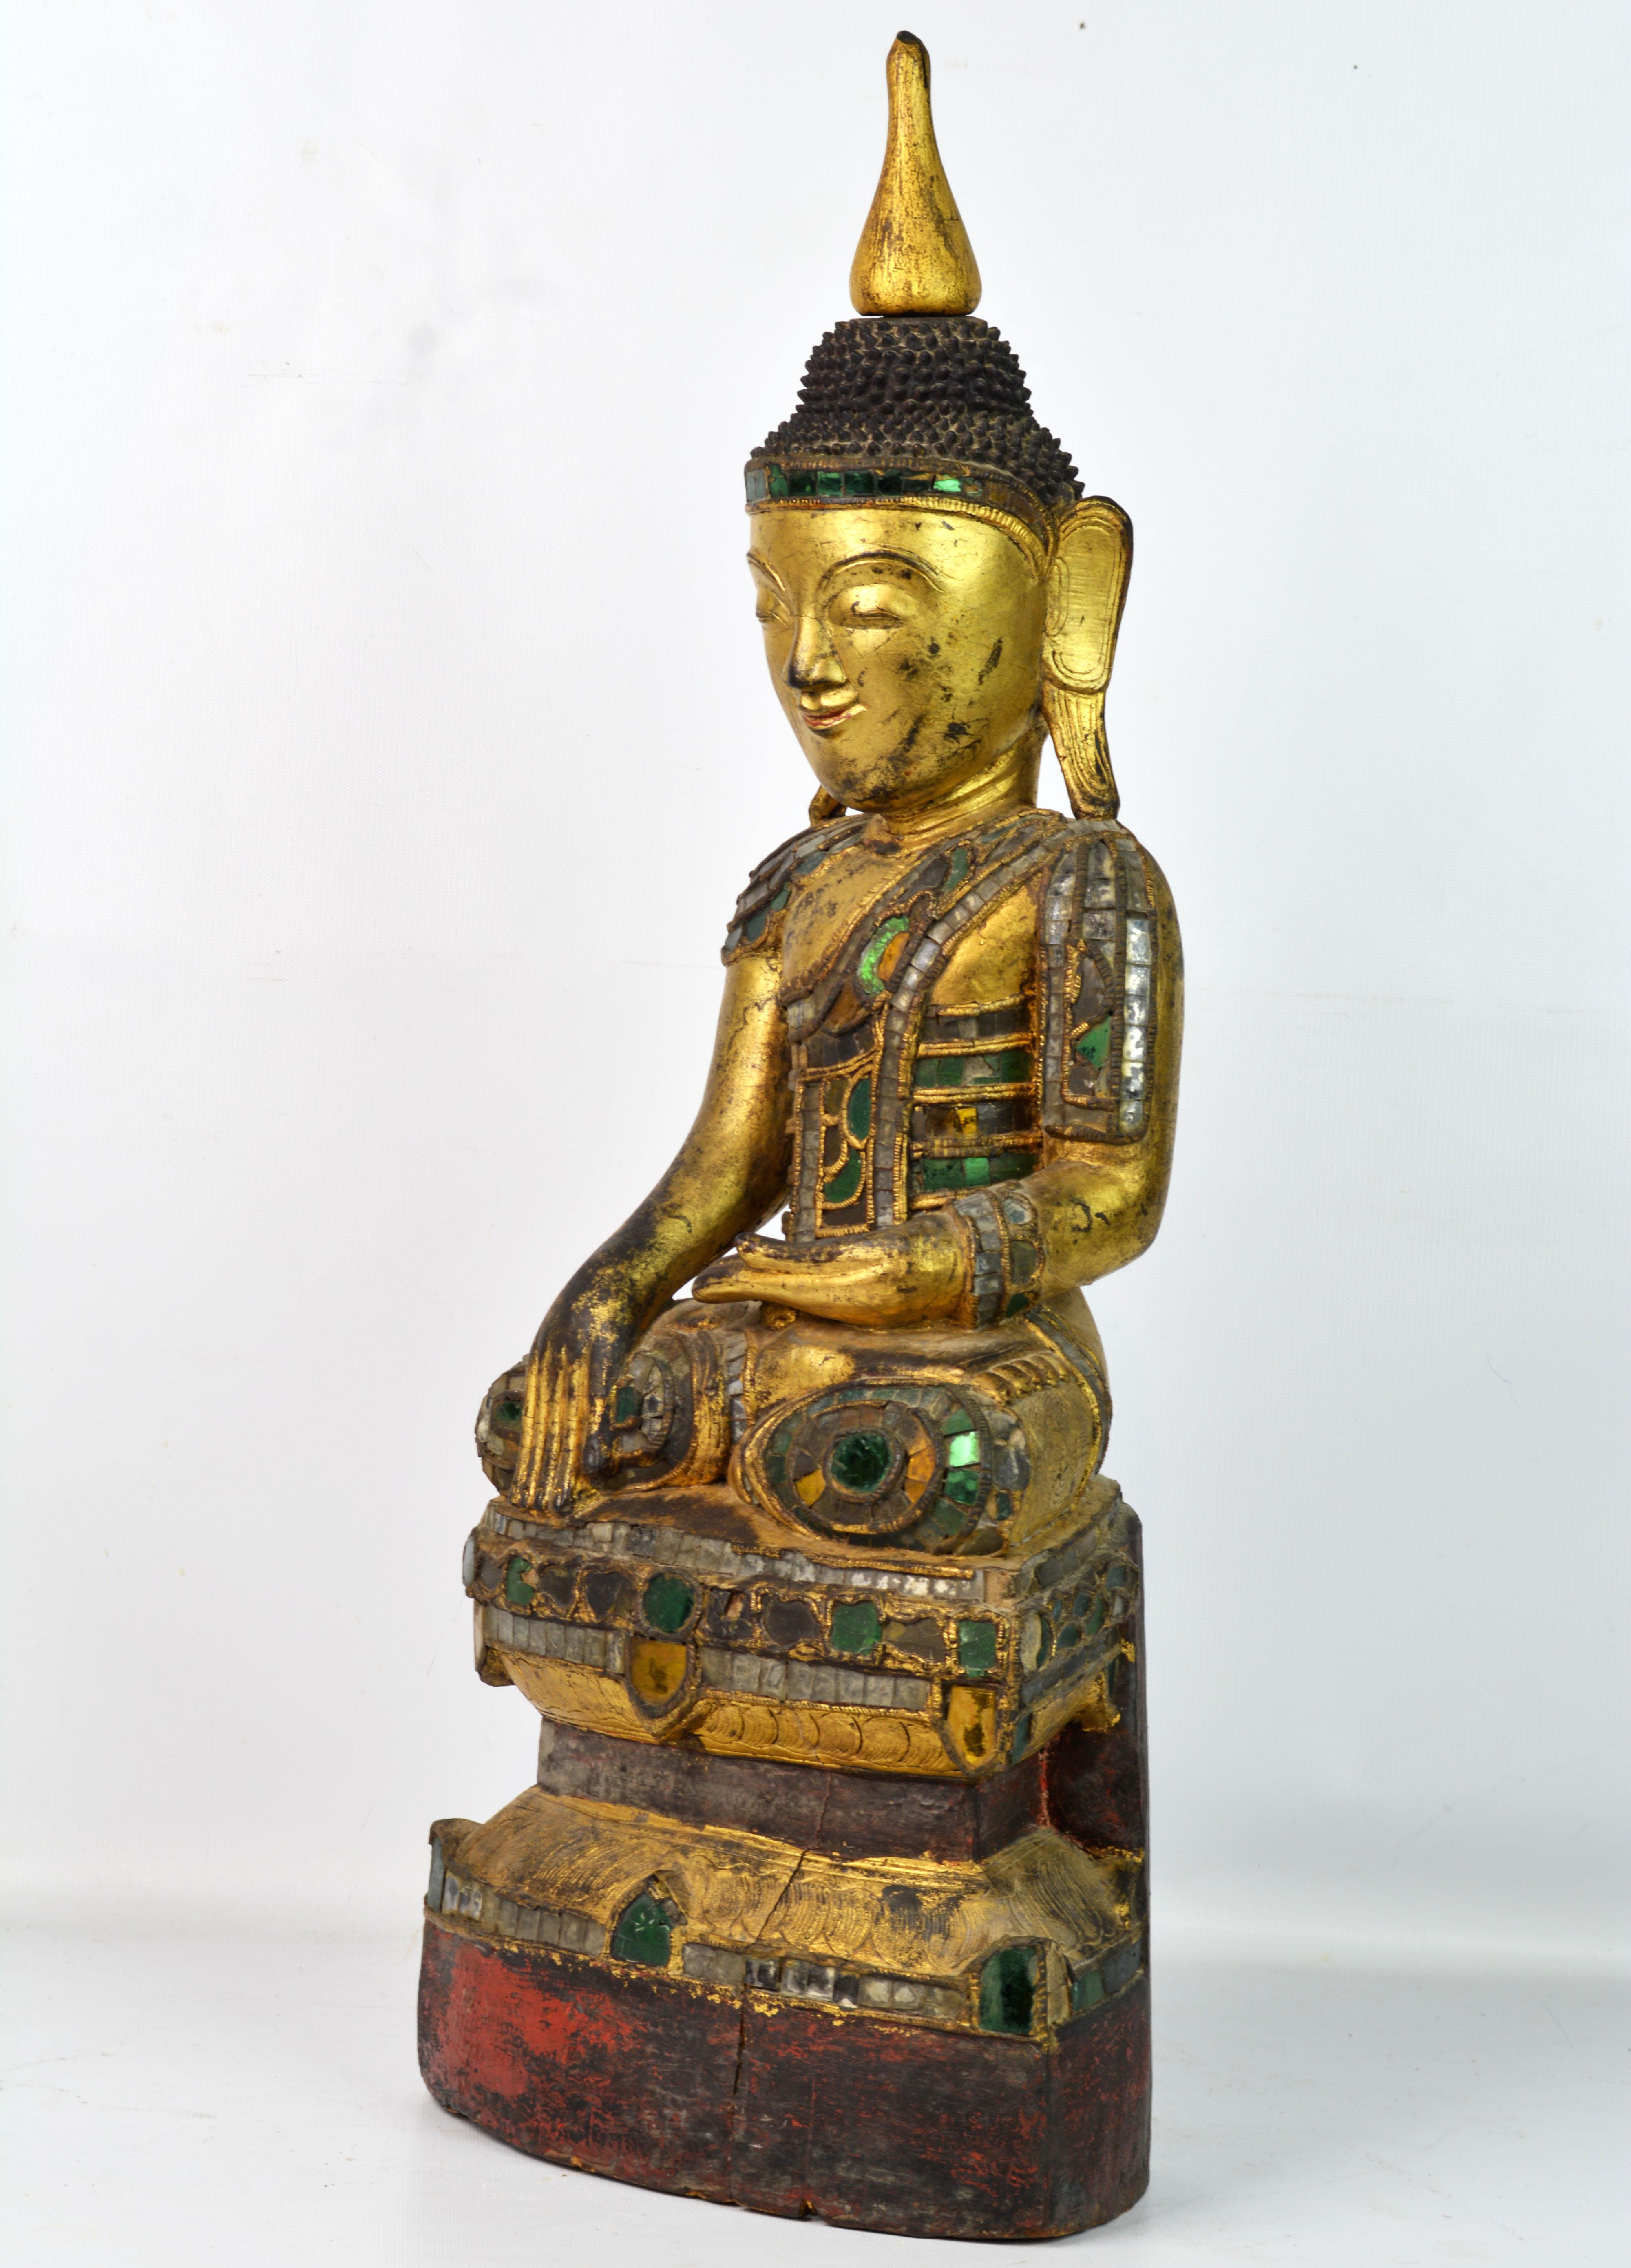 Rare late 19th century Burmese carved, lacquered and gilt Buddha with rich polychrome glass inlay. The historical Buddha, Shakyamuni, is portrayed in bhumisparsha mudra, the gesture of calling the Earth to witness, commemorating the moment the